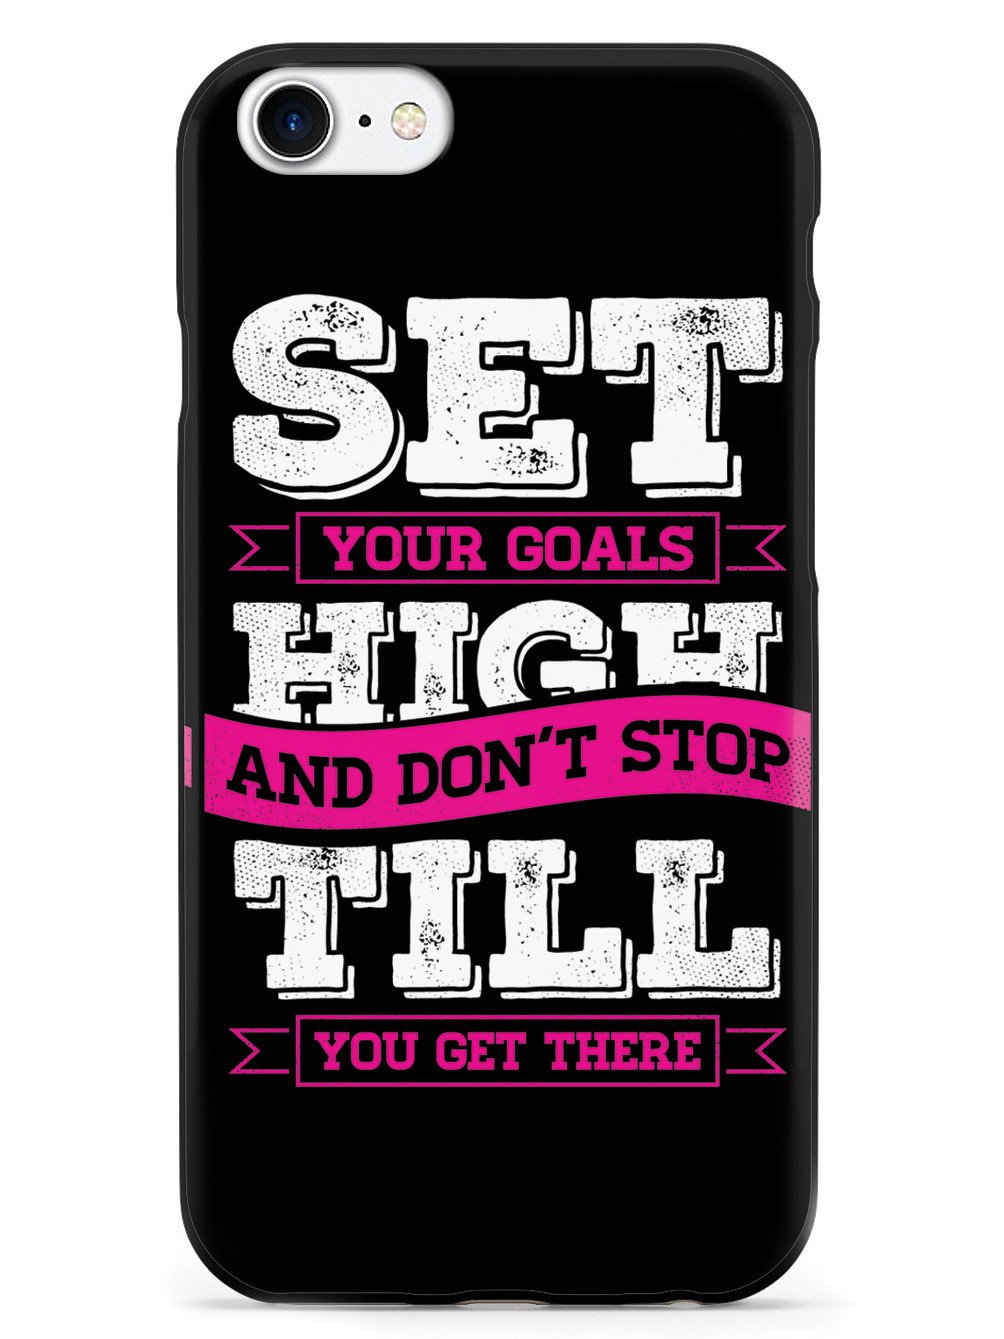 Set Your Goals High, Don't Stop - Black Case - pipercleo.com